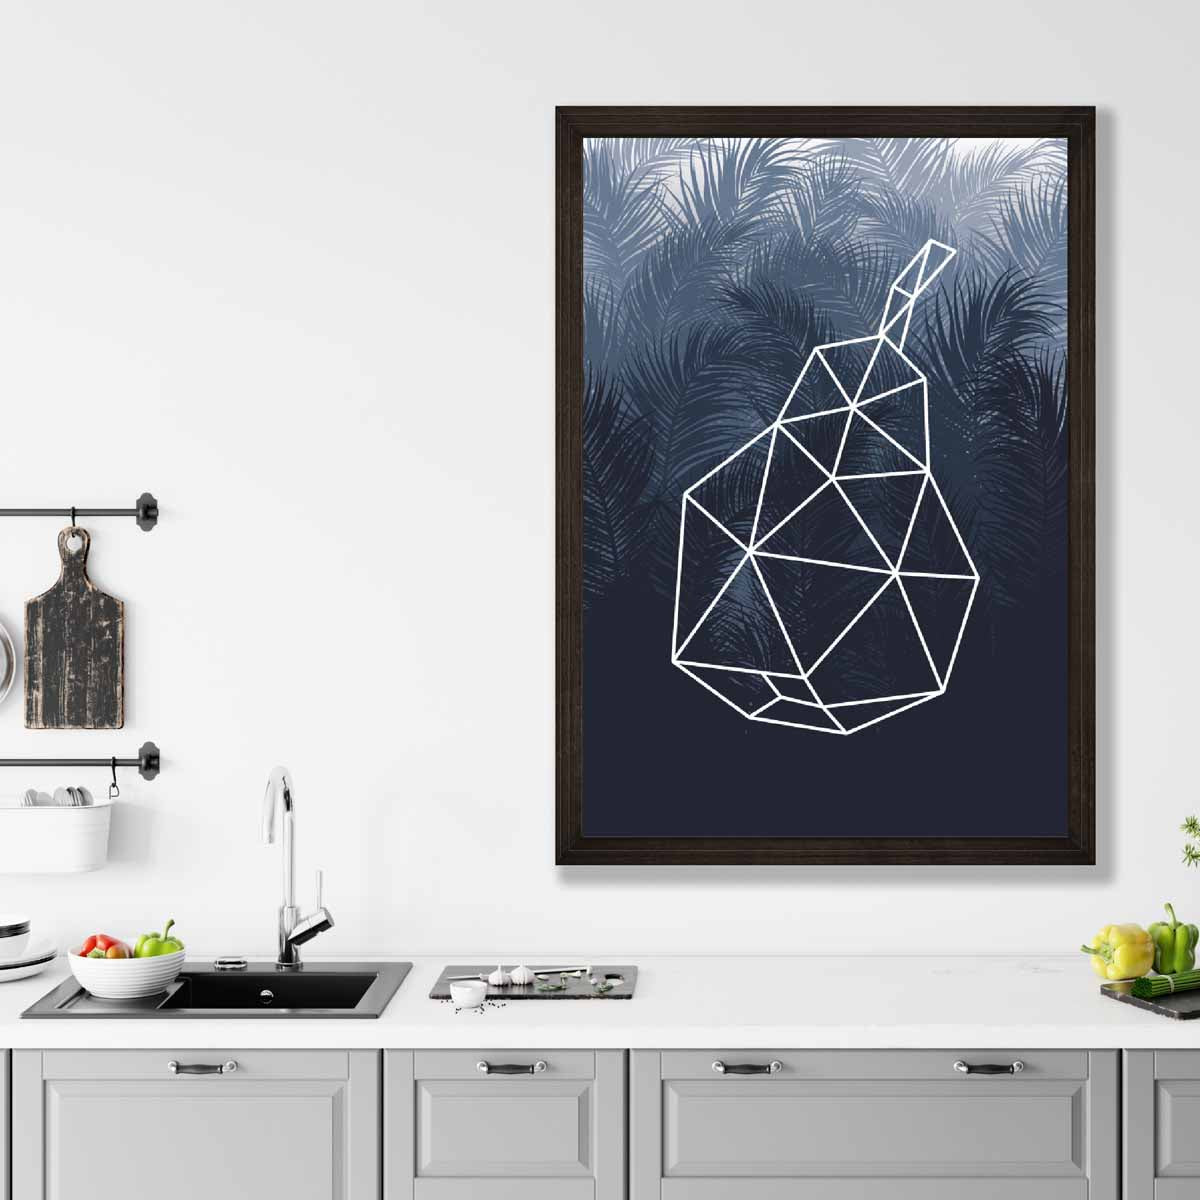 Geometric Fruit Poster Line Art of a Pear on Navy Palms